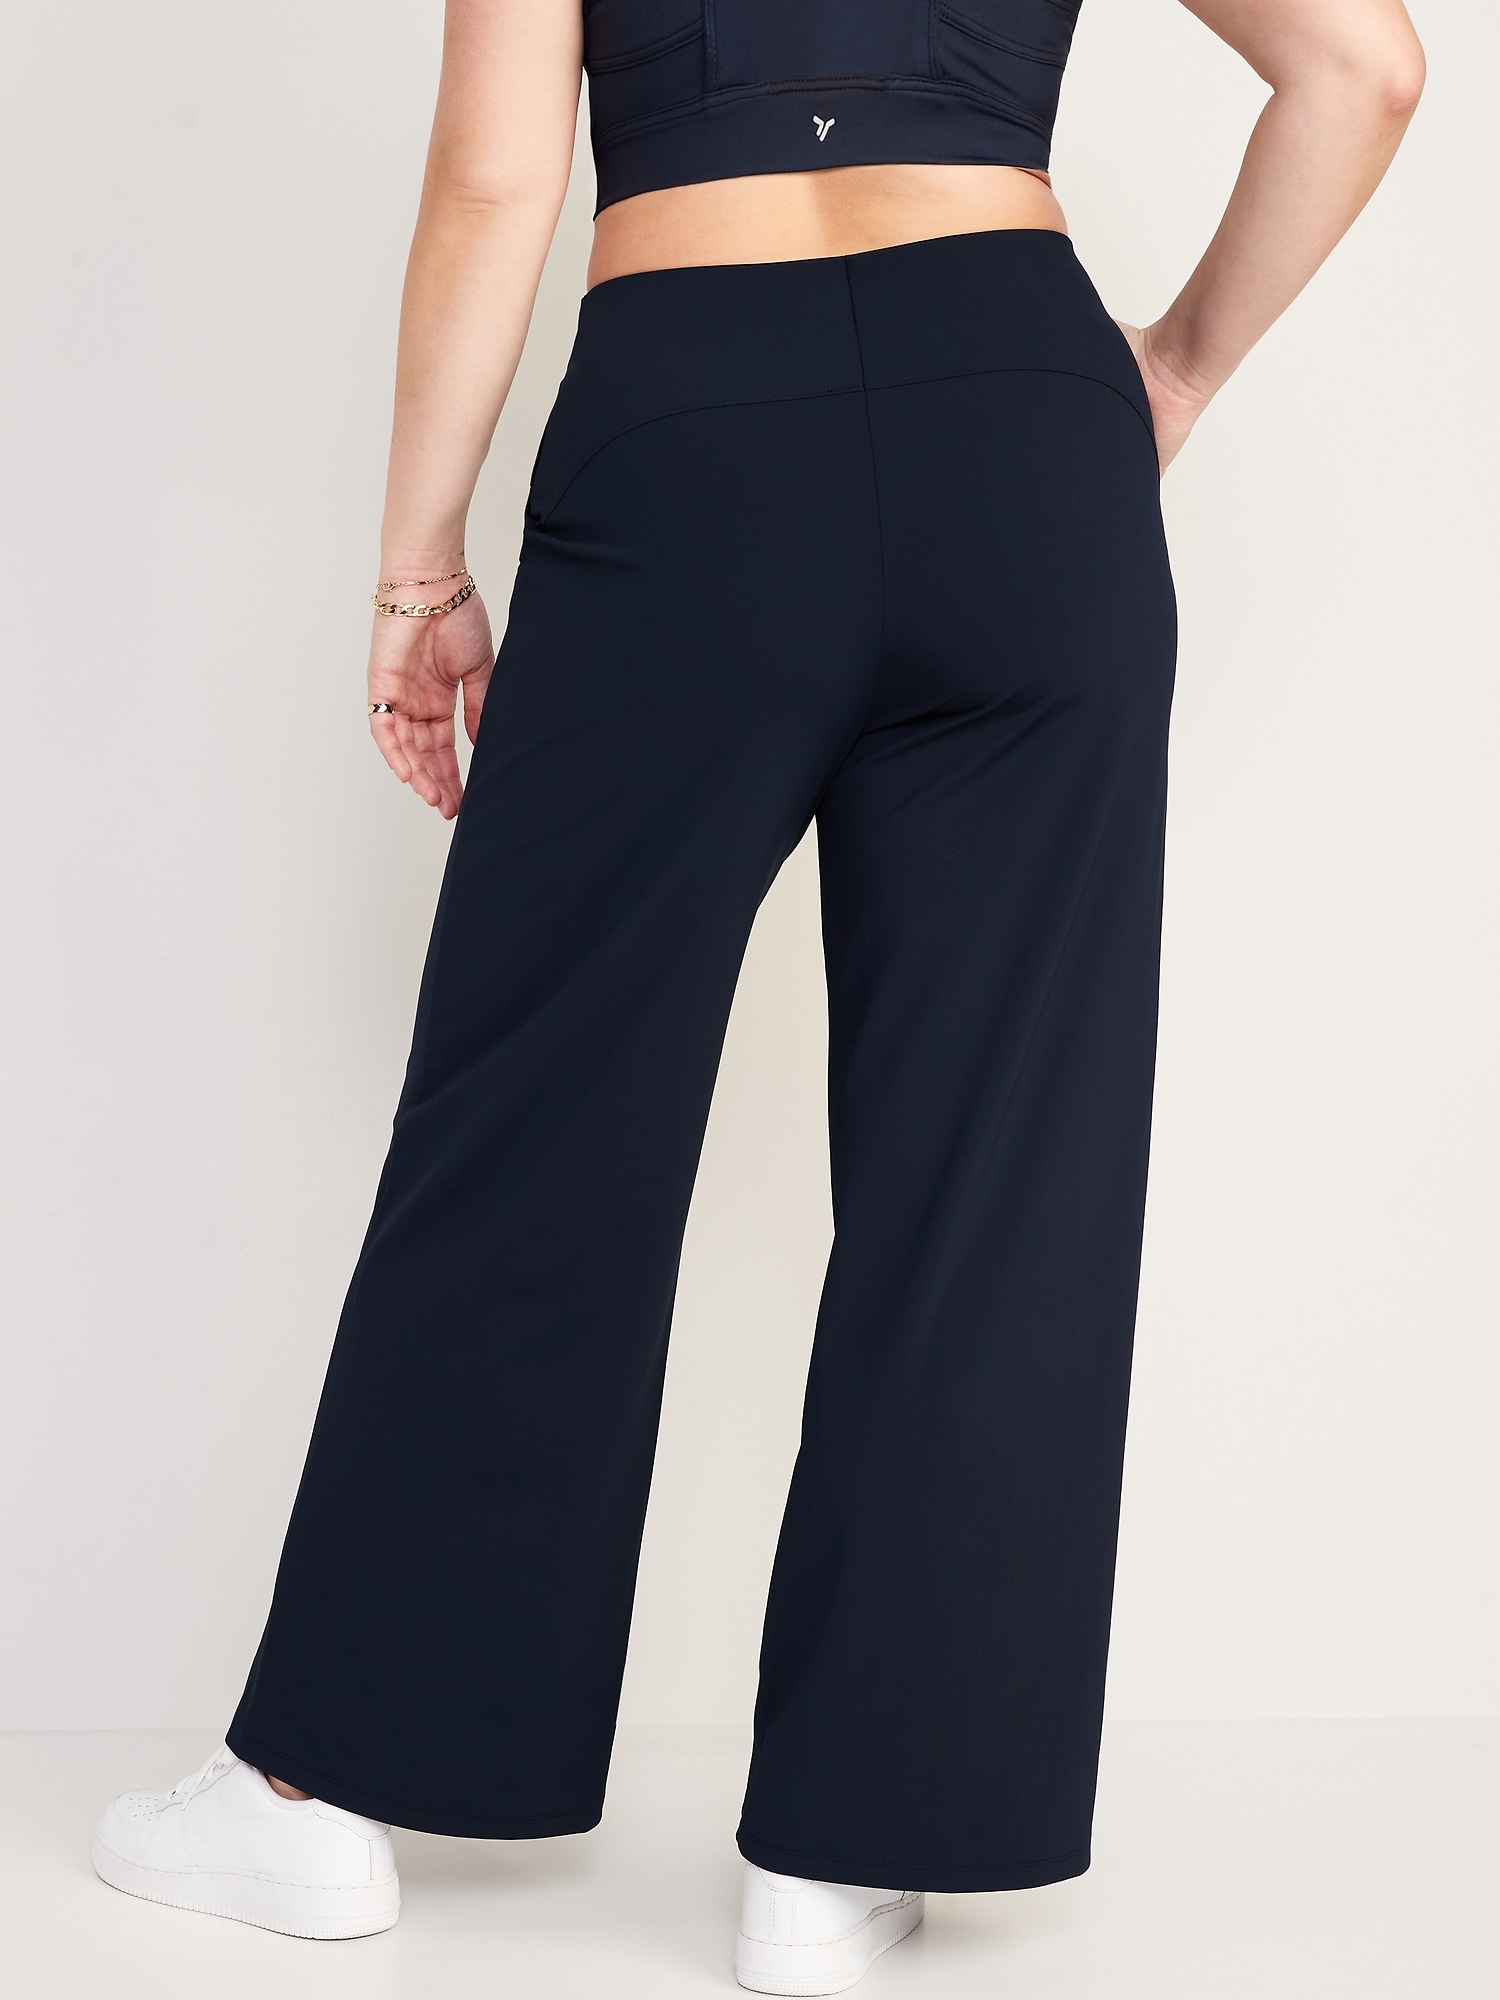 SoftSuit Trousers in TENCEL™ Lyocell | Gap | Pants for women, Wide leg  trousers, High waisted trousers